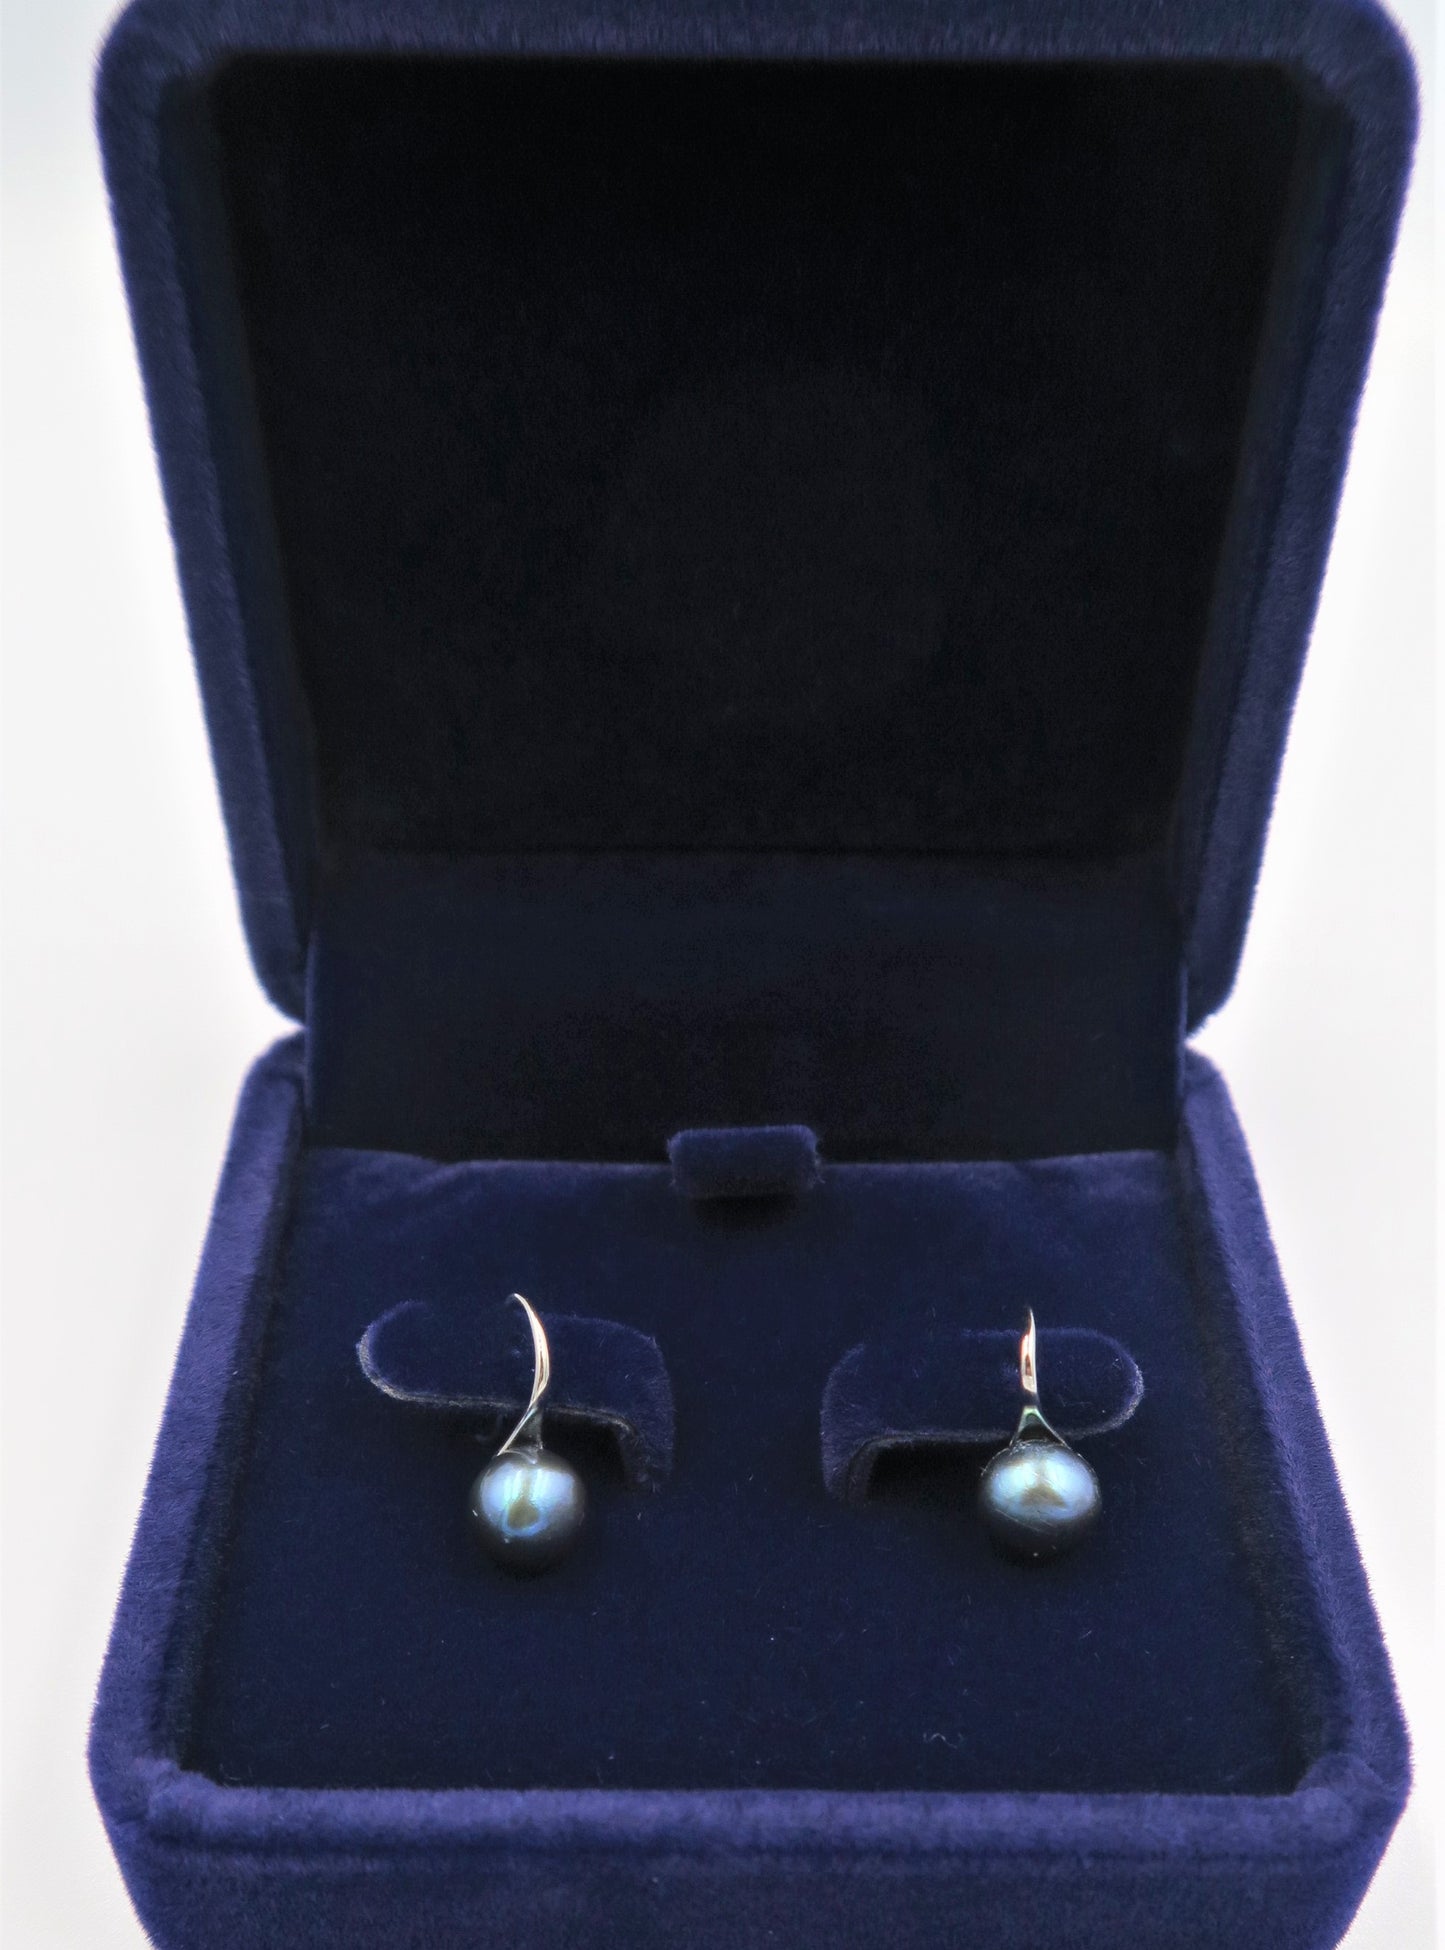 PL - Real Pearl Earrings White, Pink, Purple or Black Celeste 925 Fresh Water Pearls Collection Sterling Silver gift box